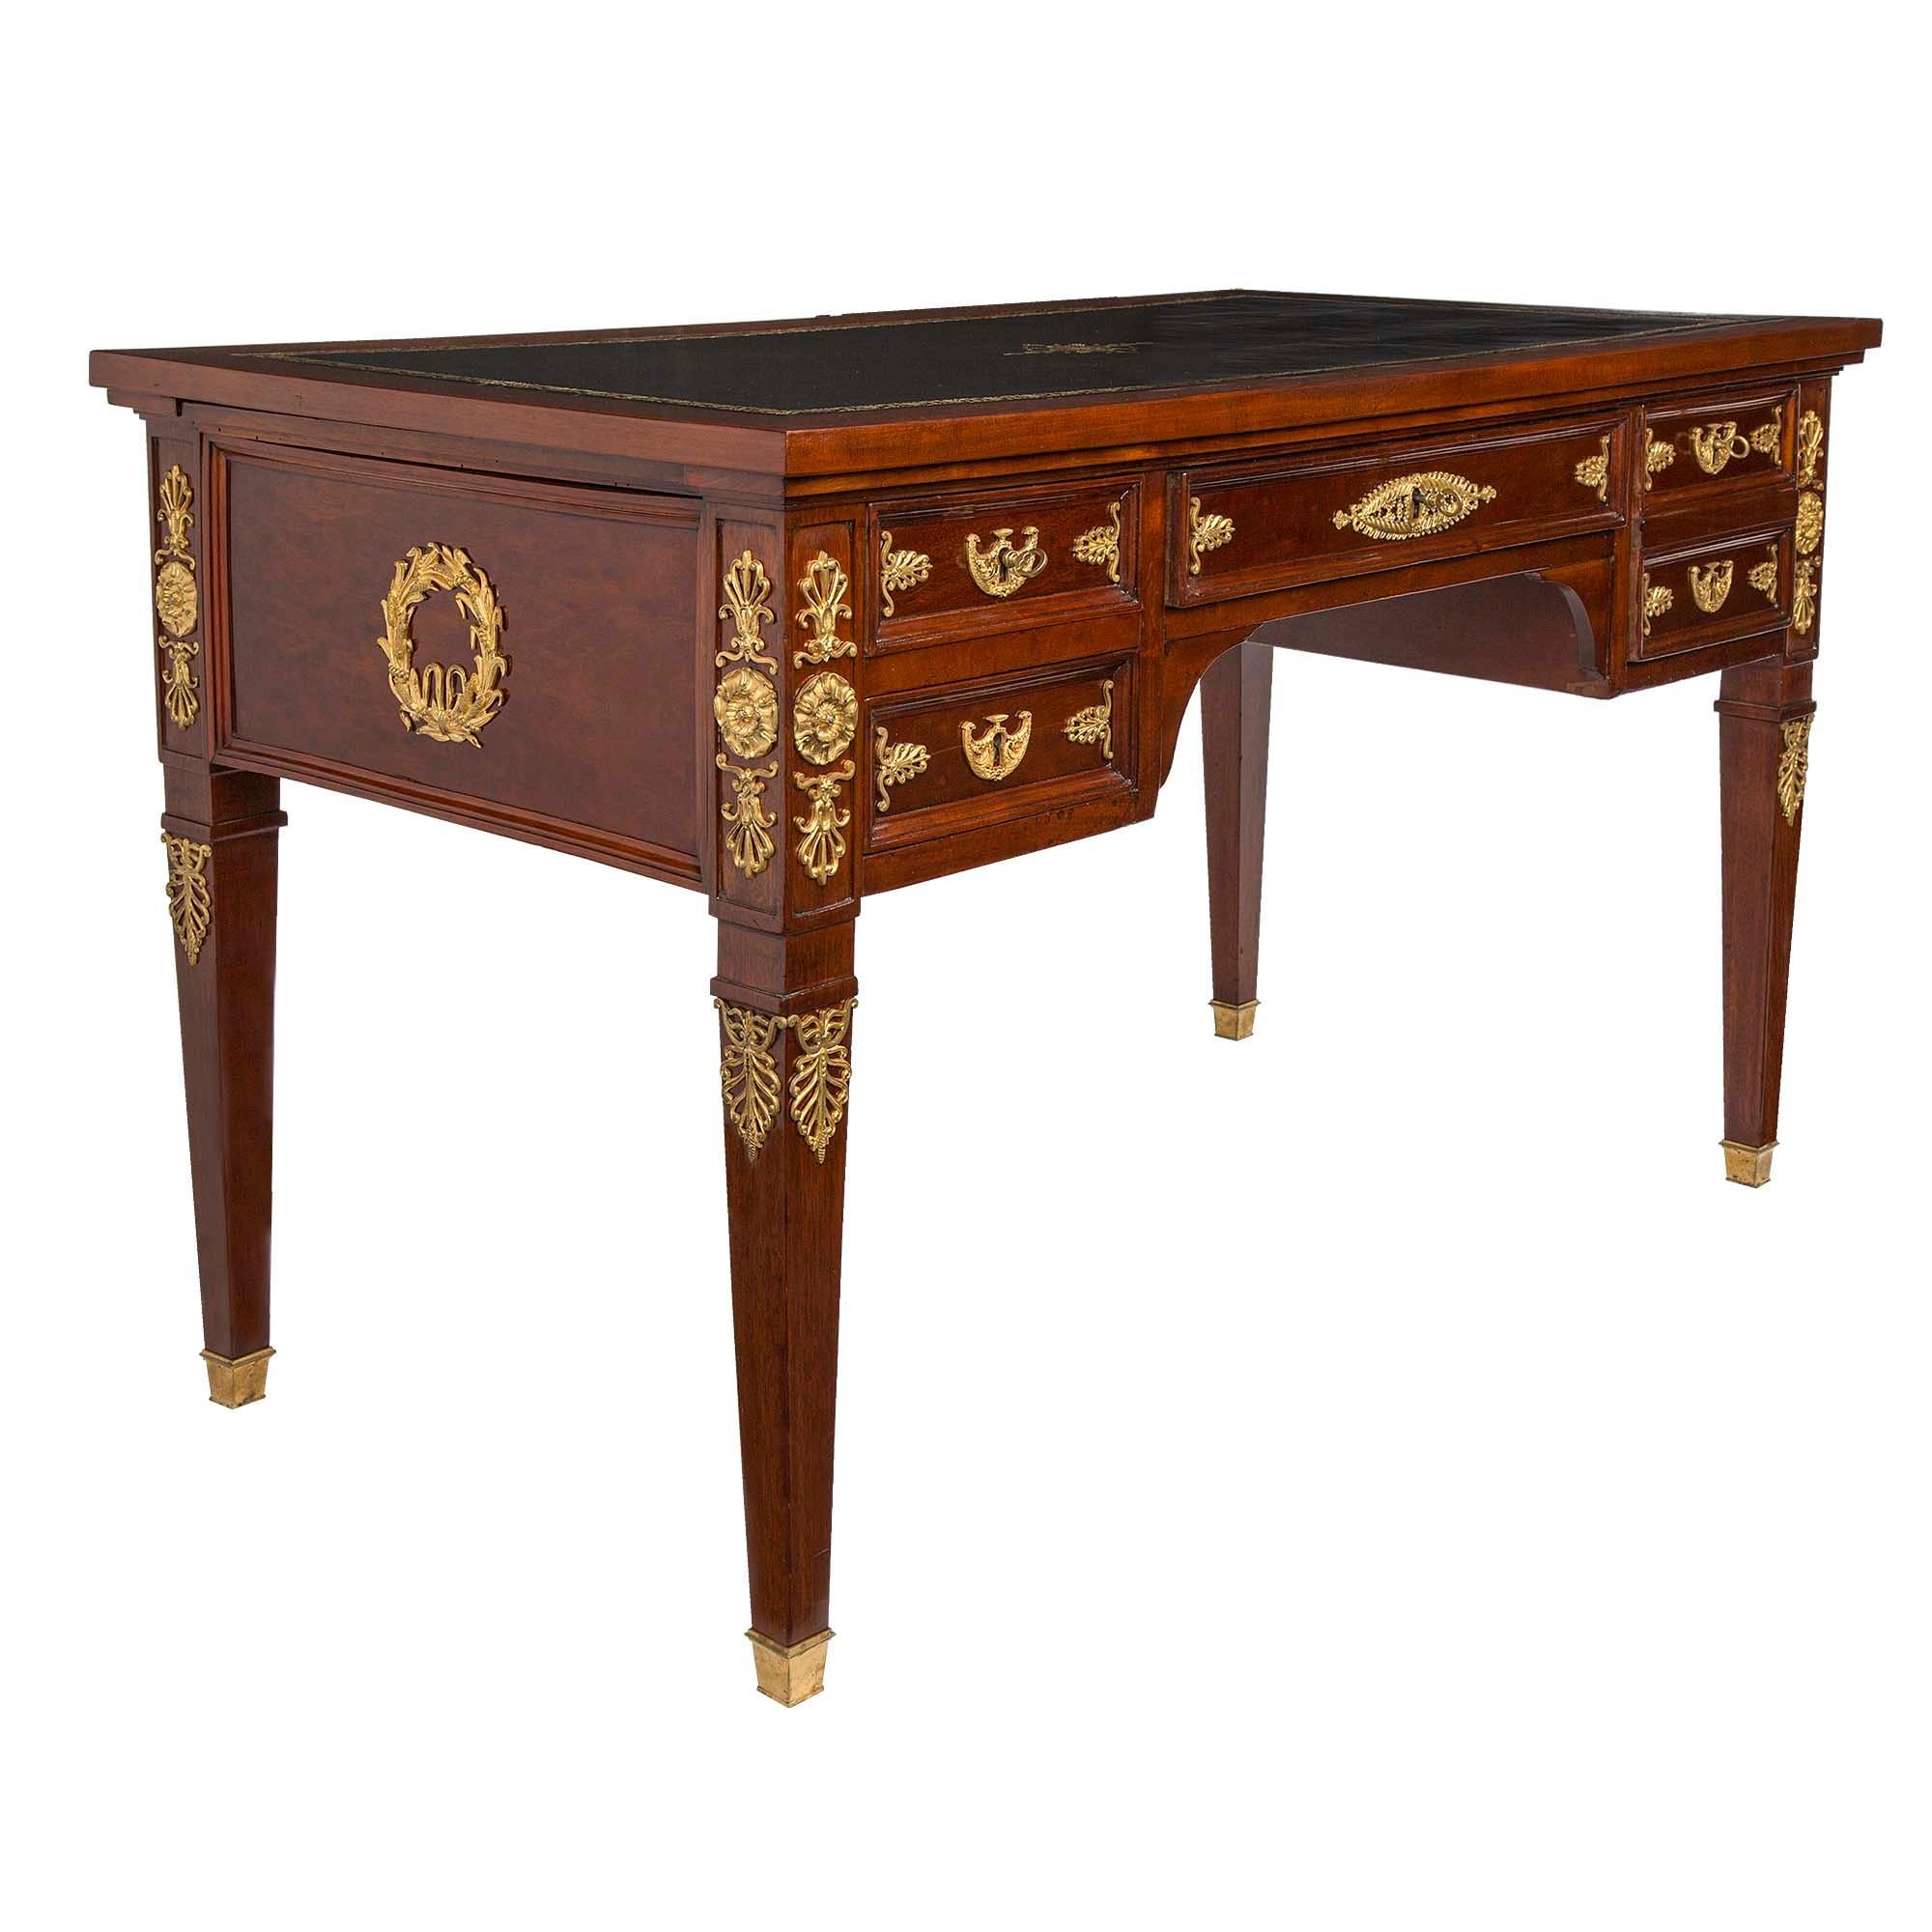 French 19th Century Empire Style Mahogany and Ormolu Bureau Plat In Good Condition For Sale In West Palm Beach, FL